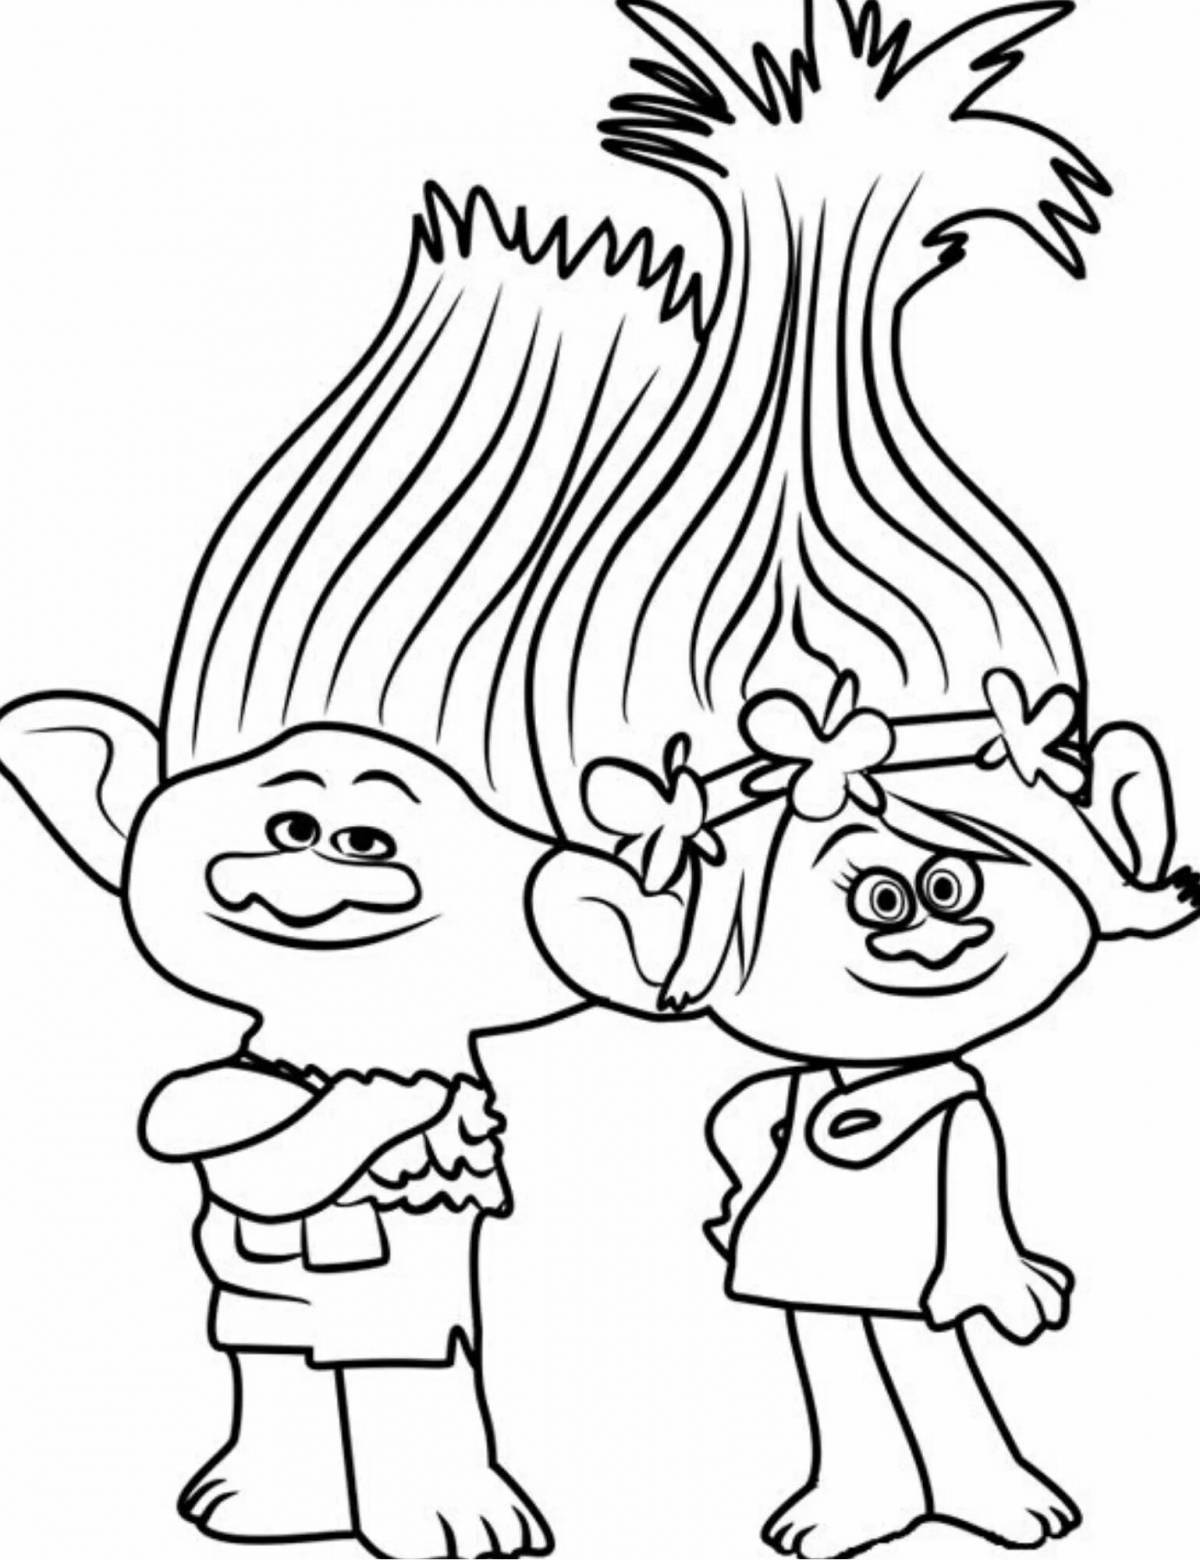 Troll girls live coloring book